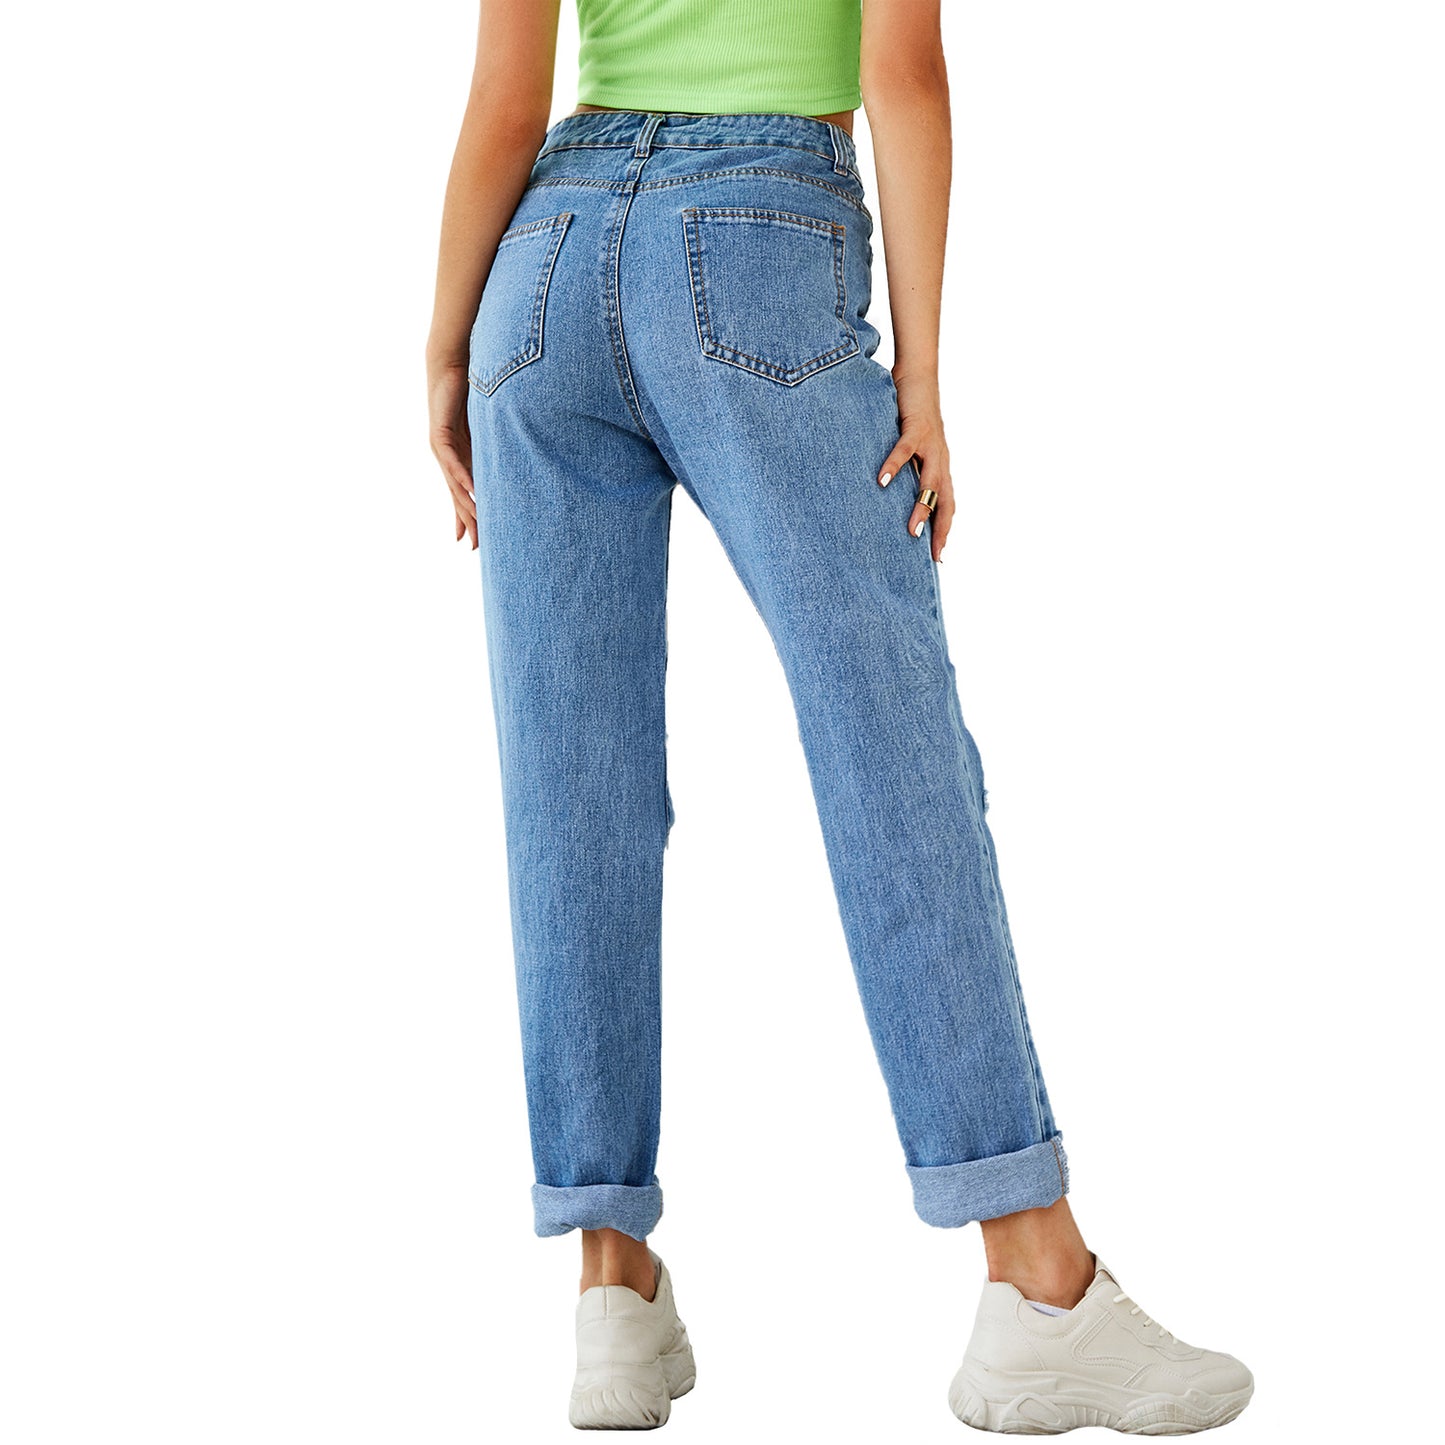 High Waist Ripped Straight Denim Trousers for Women's Fashion